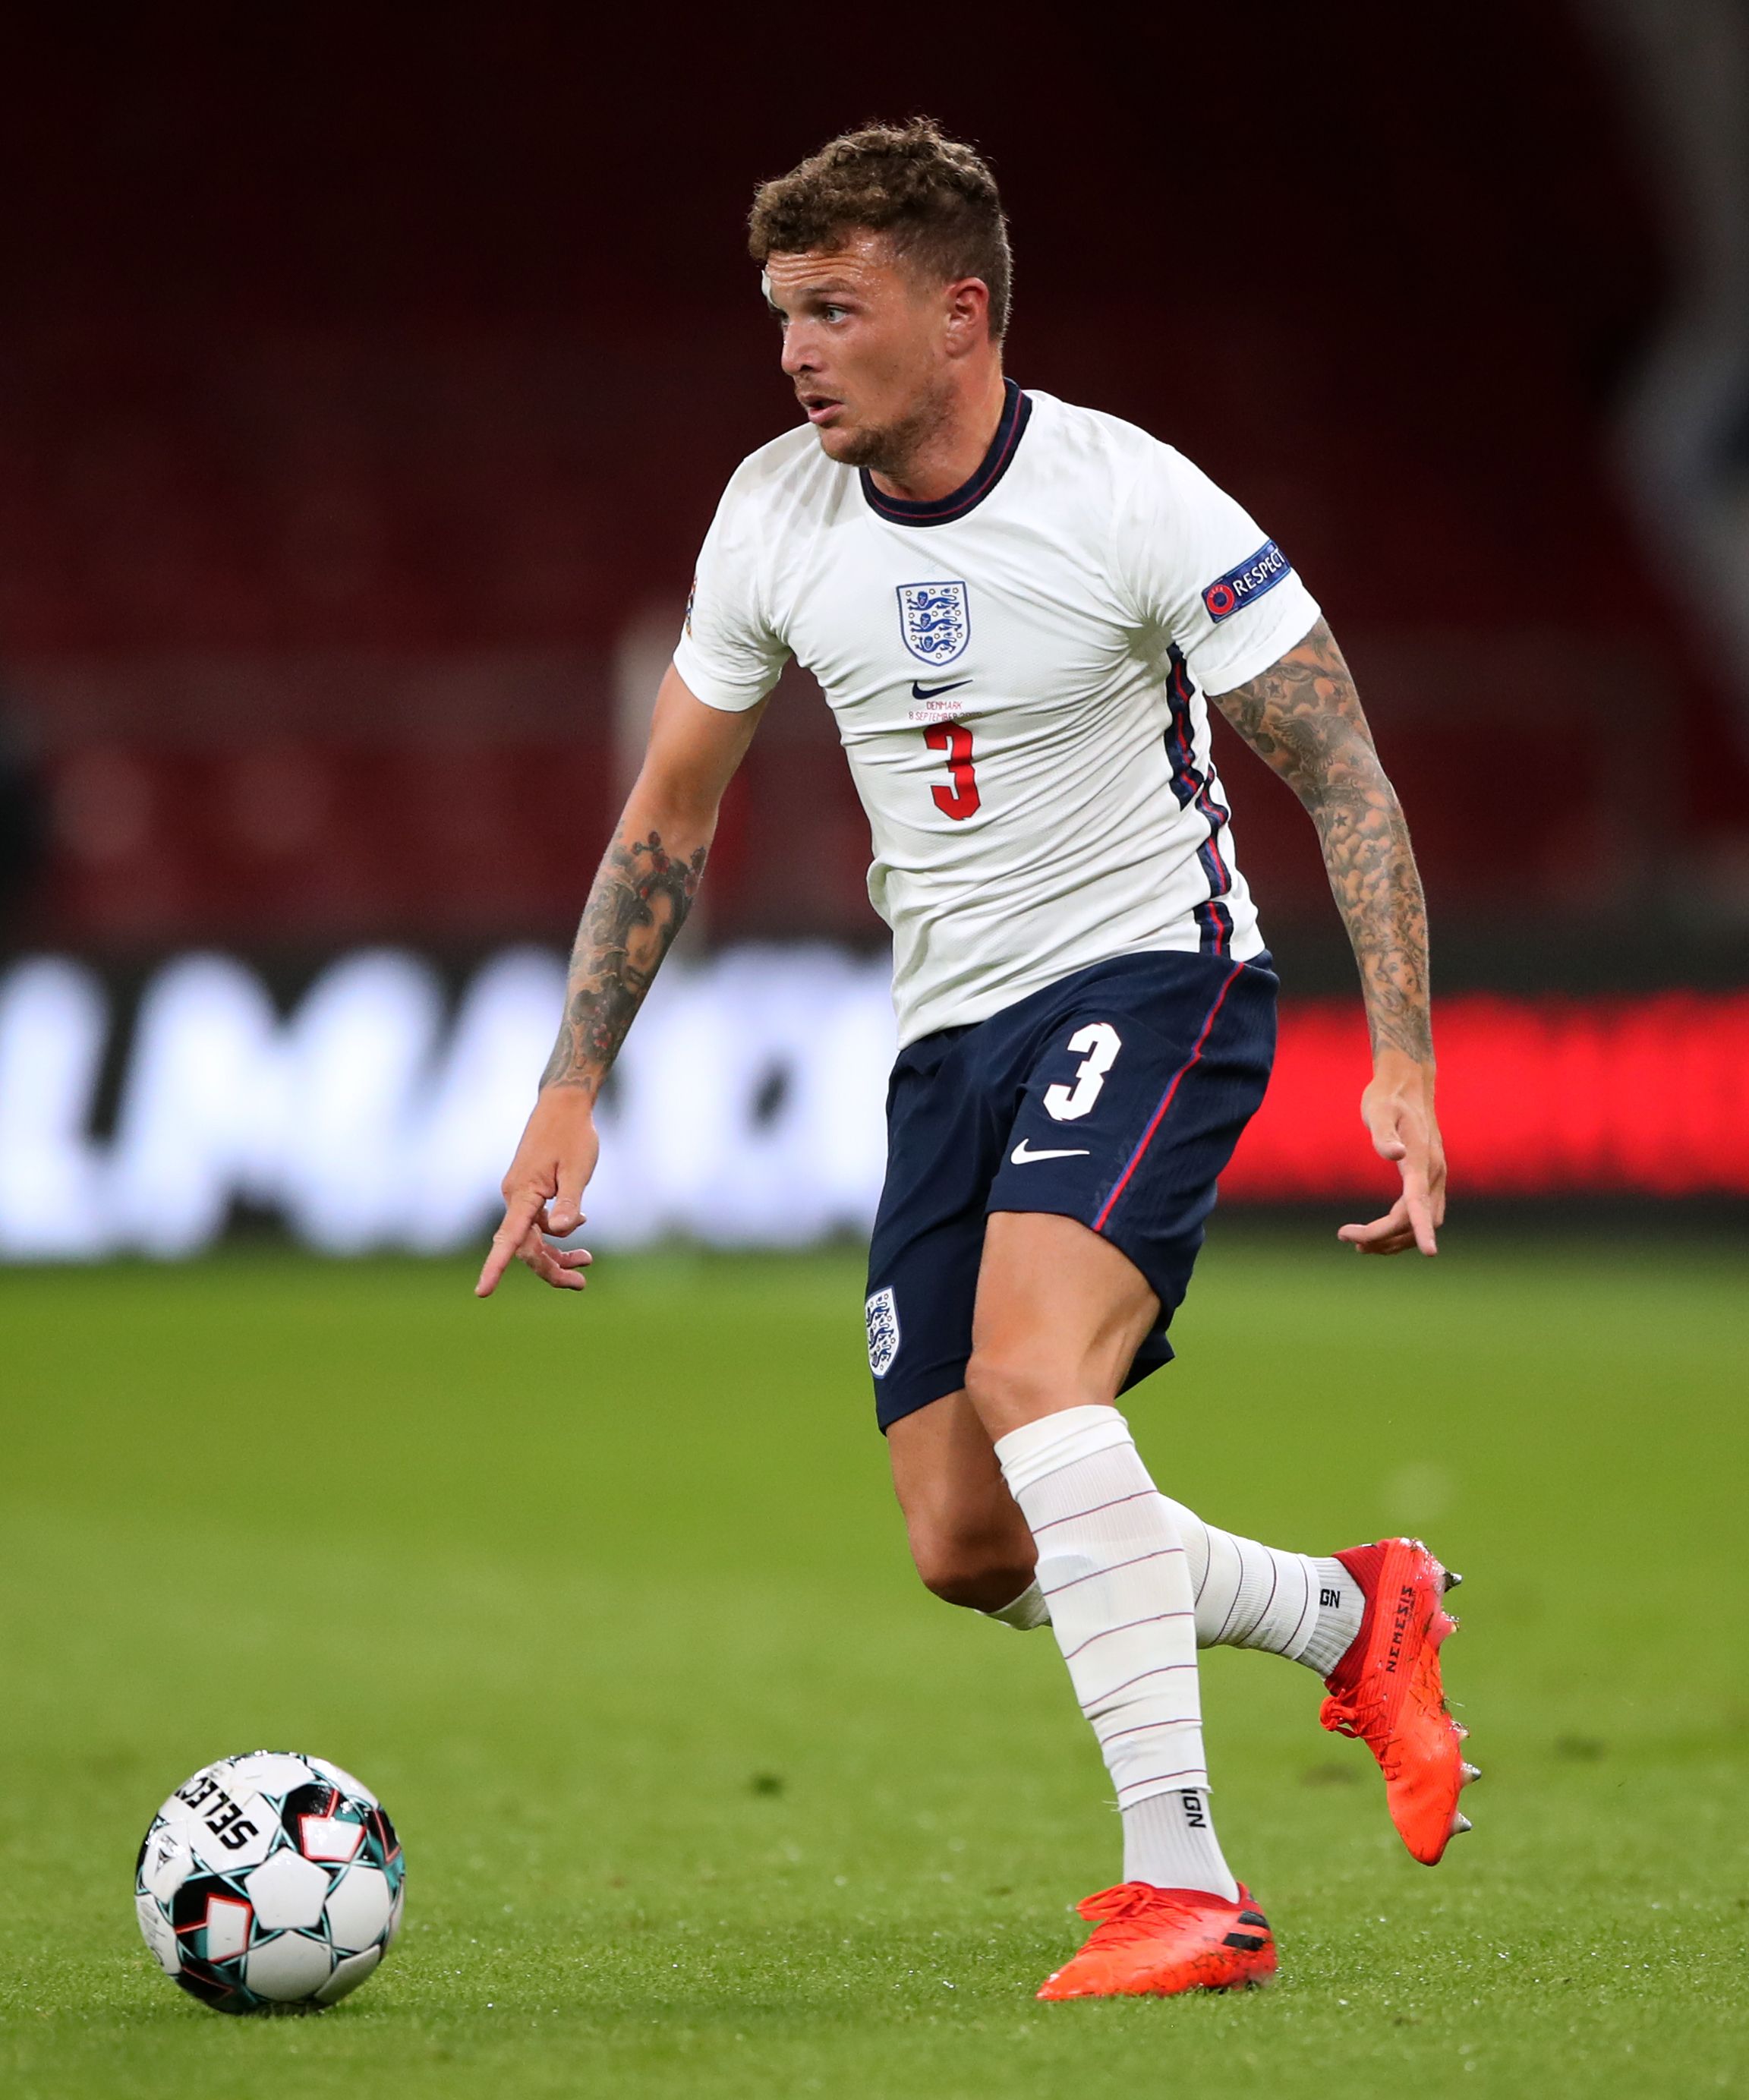 Tindall reveals Riquelme recommendation from England star Trippier